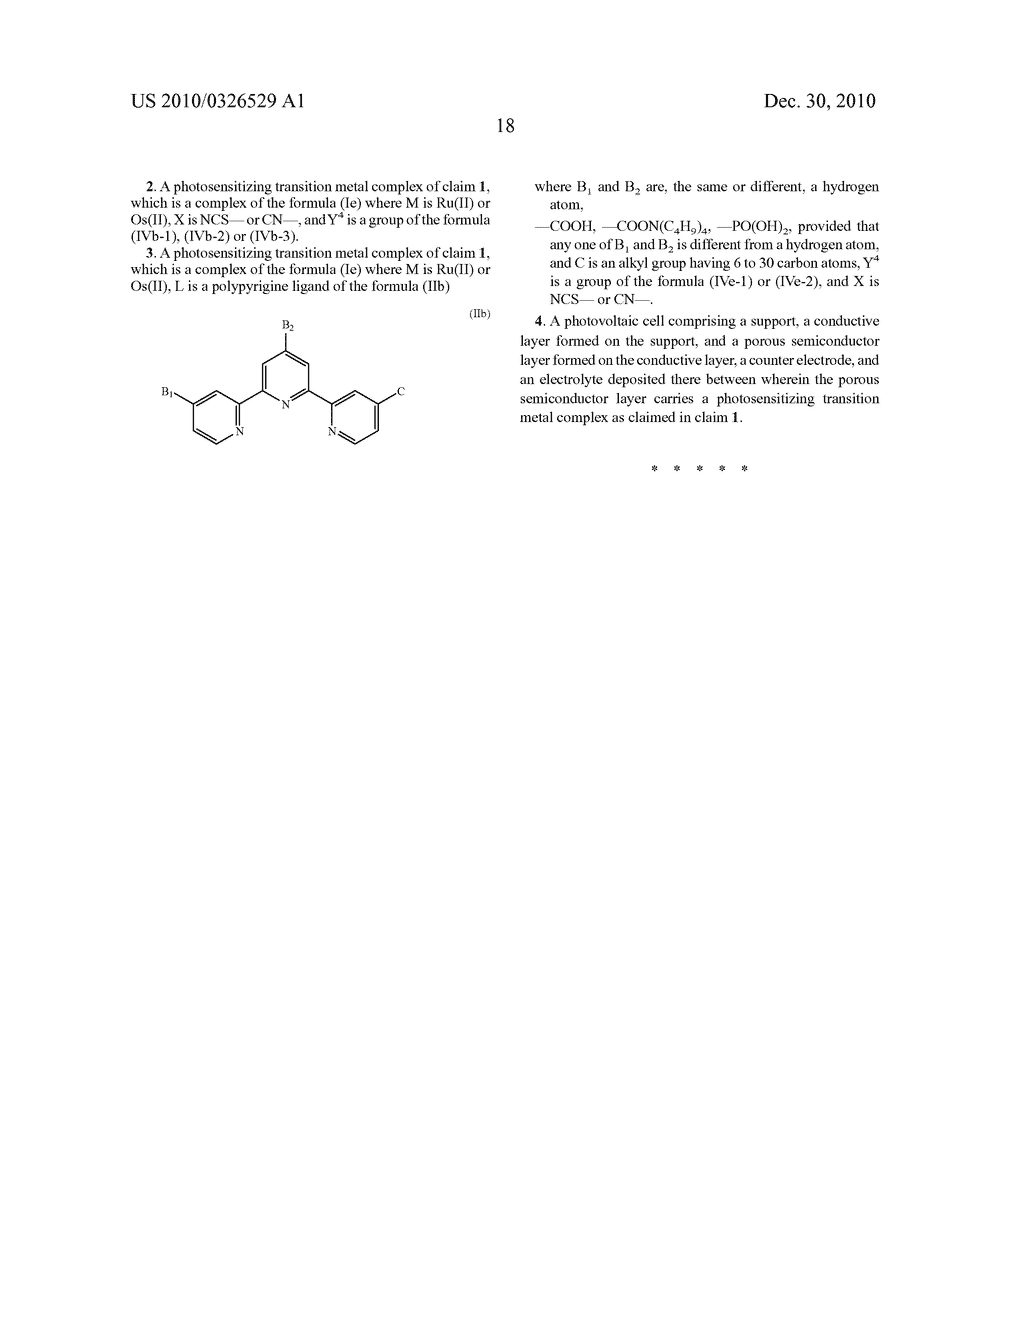 PHOTOSENSITIZING TRANSITION METAL COMPLEX AND ITS USE FOR PHOTOVOLTAIC CELL - diagram, schematic, and image 20